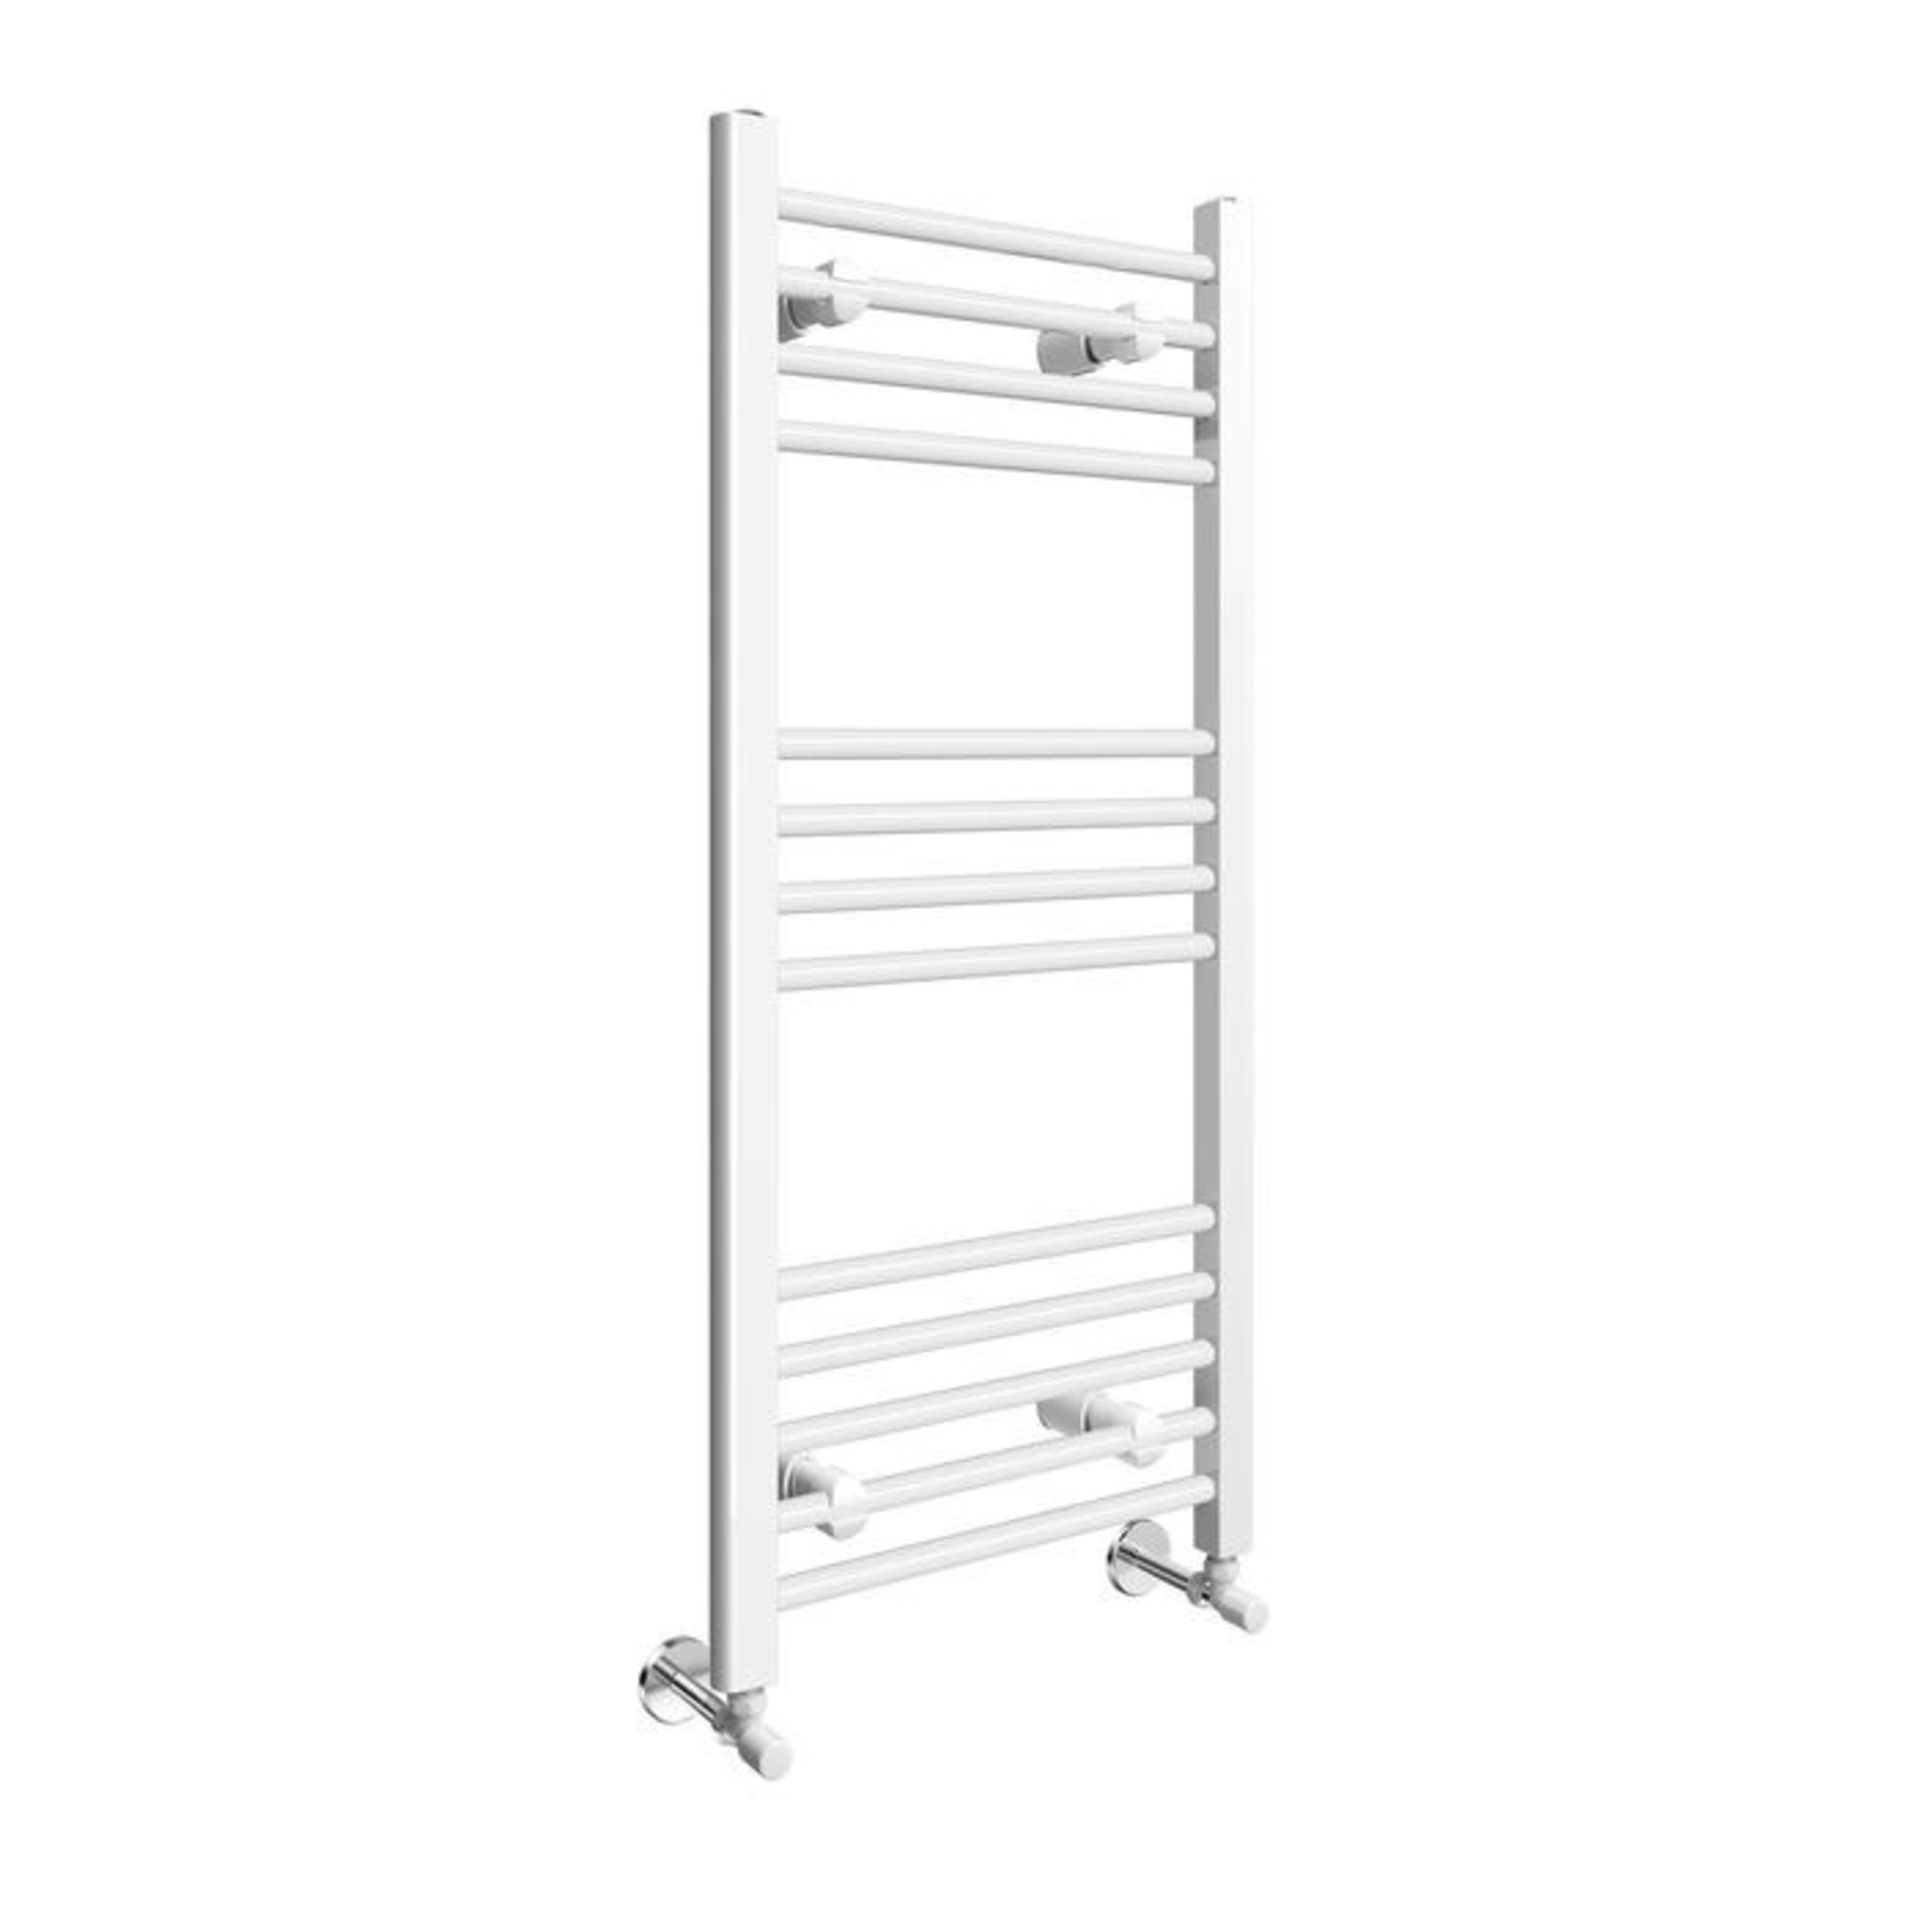 (VD158) 900x500mm White Basic Towel radiator High gloss White.RRP £165.99.Made from low-carbon... - Image 3 of 3